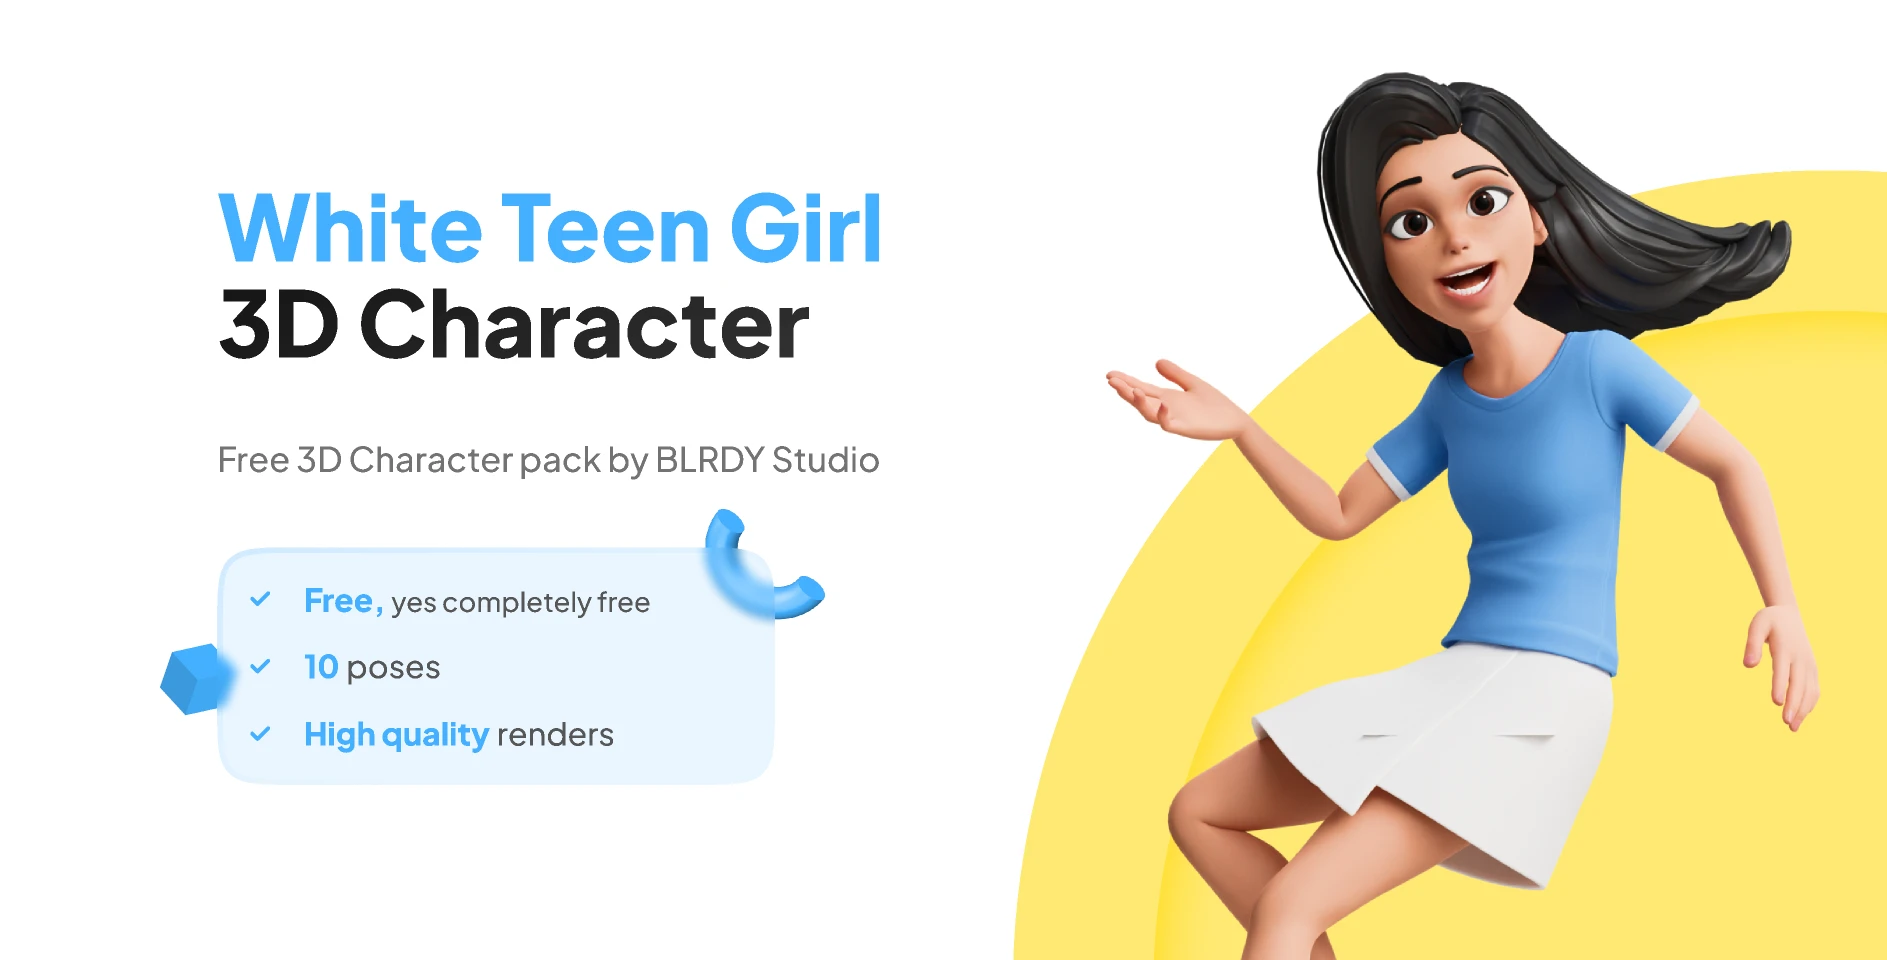 White Teen Girl 3D Character for Figma and Adobe XD